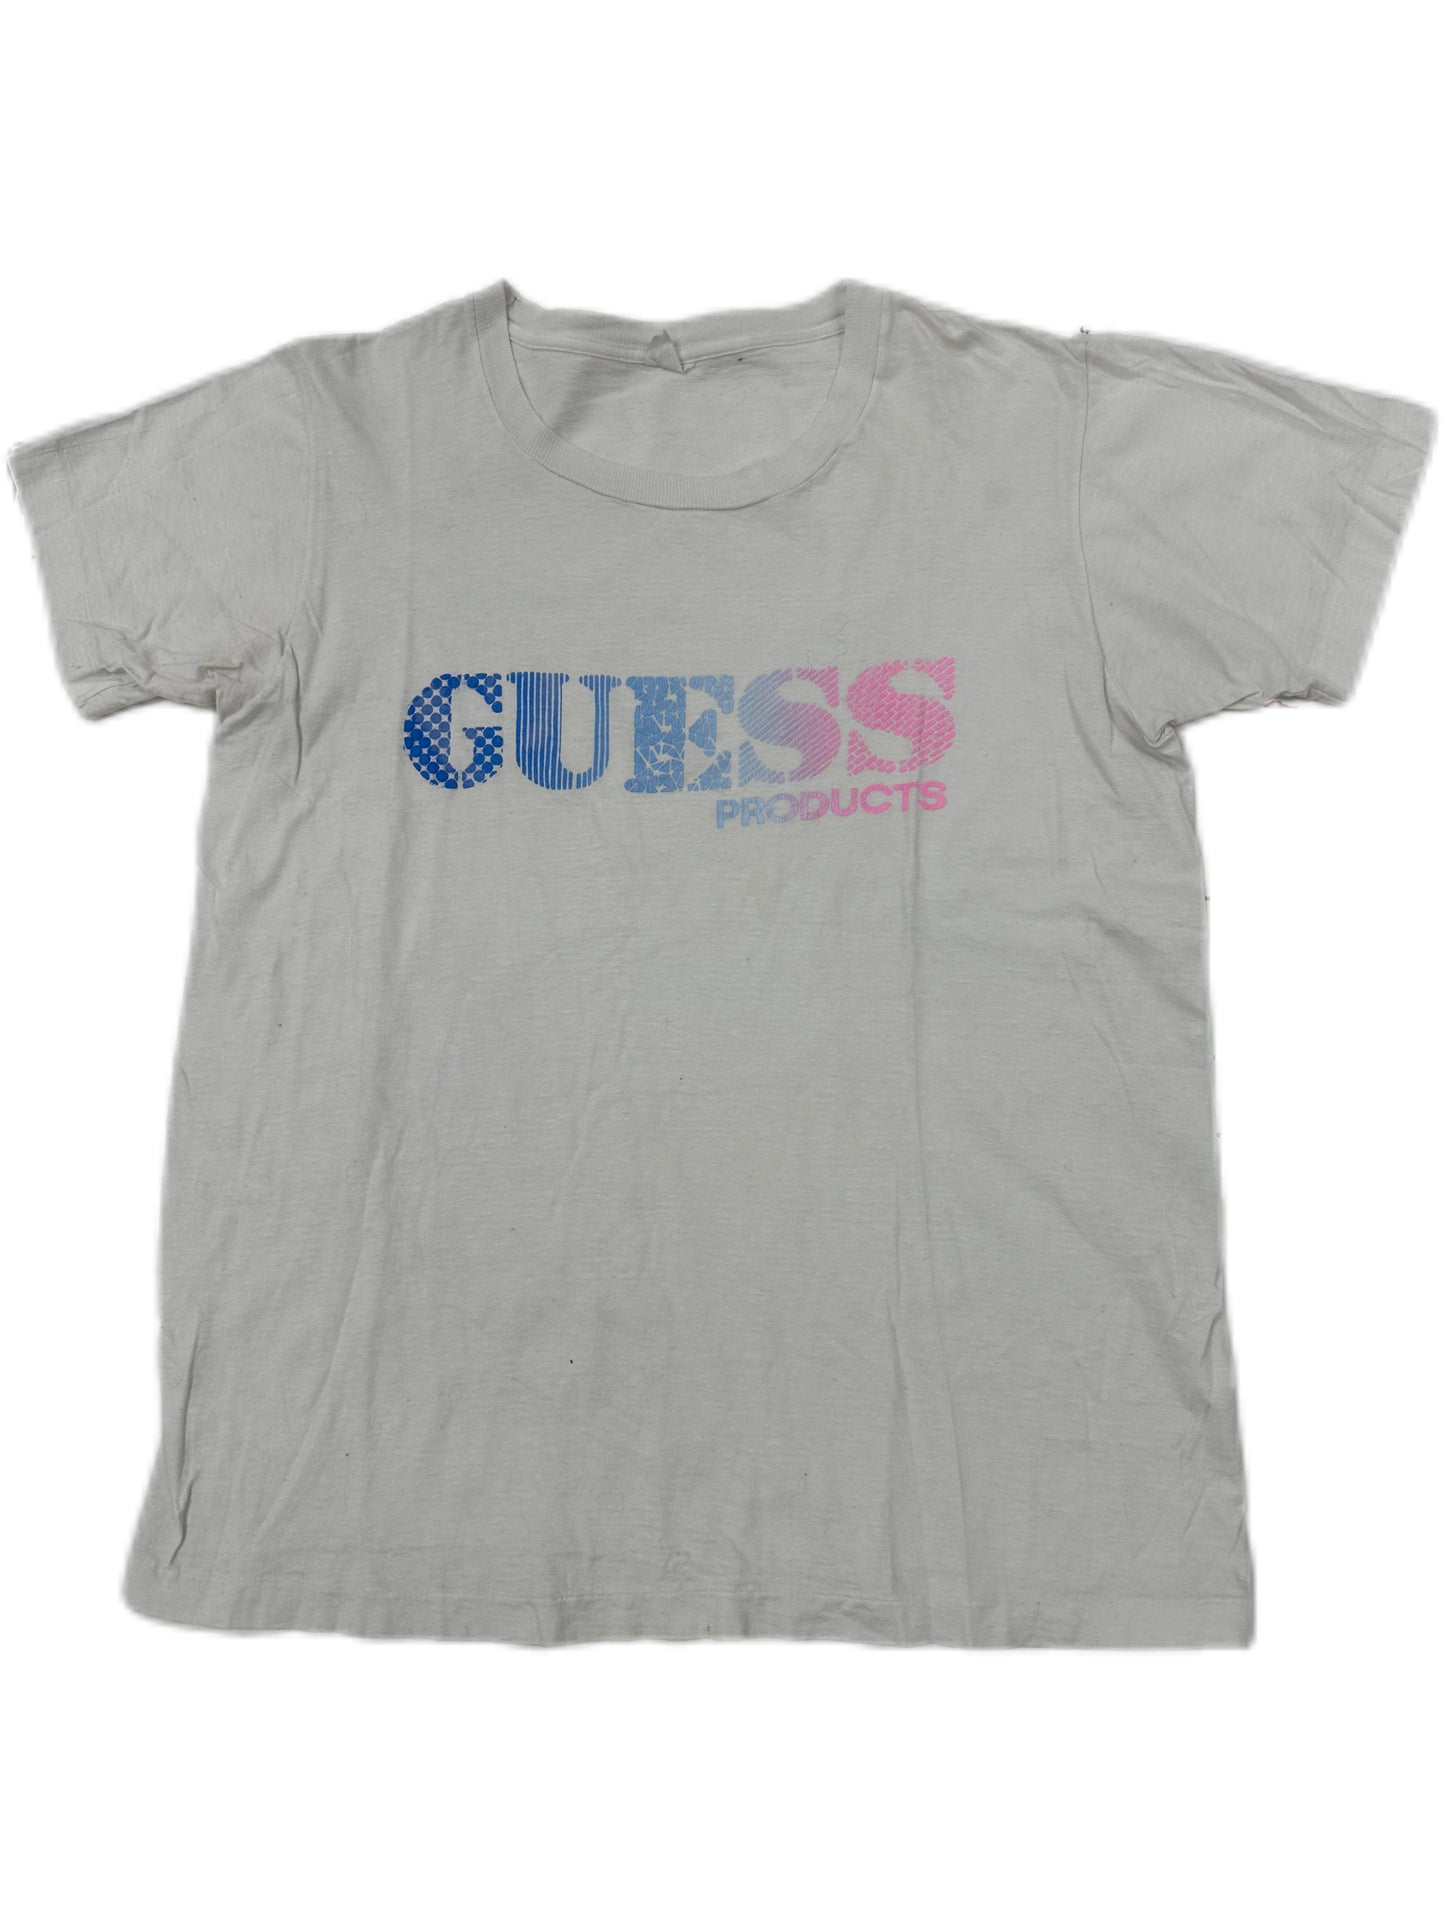 Vintage Guess Products T-Shirt White